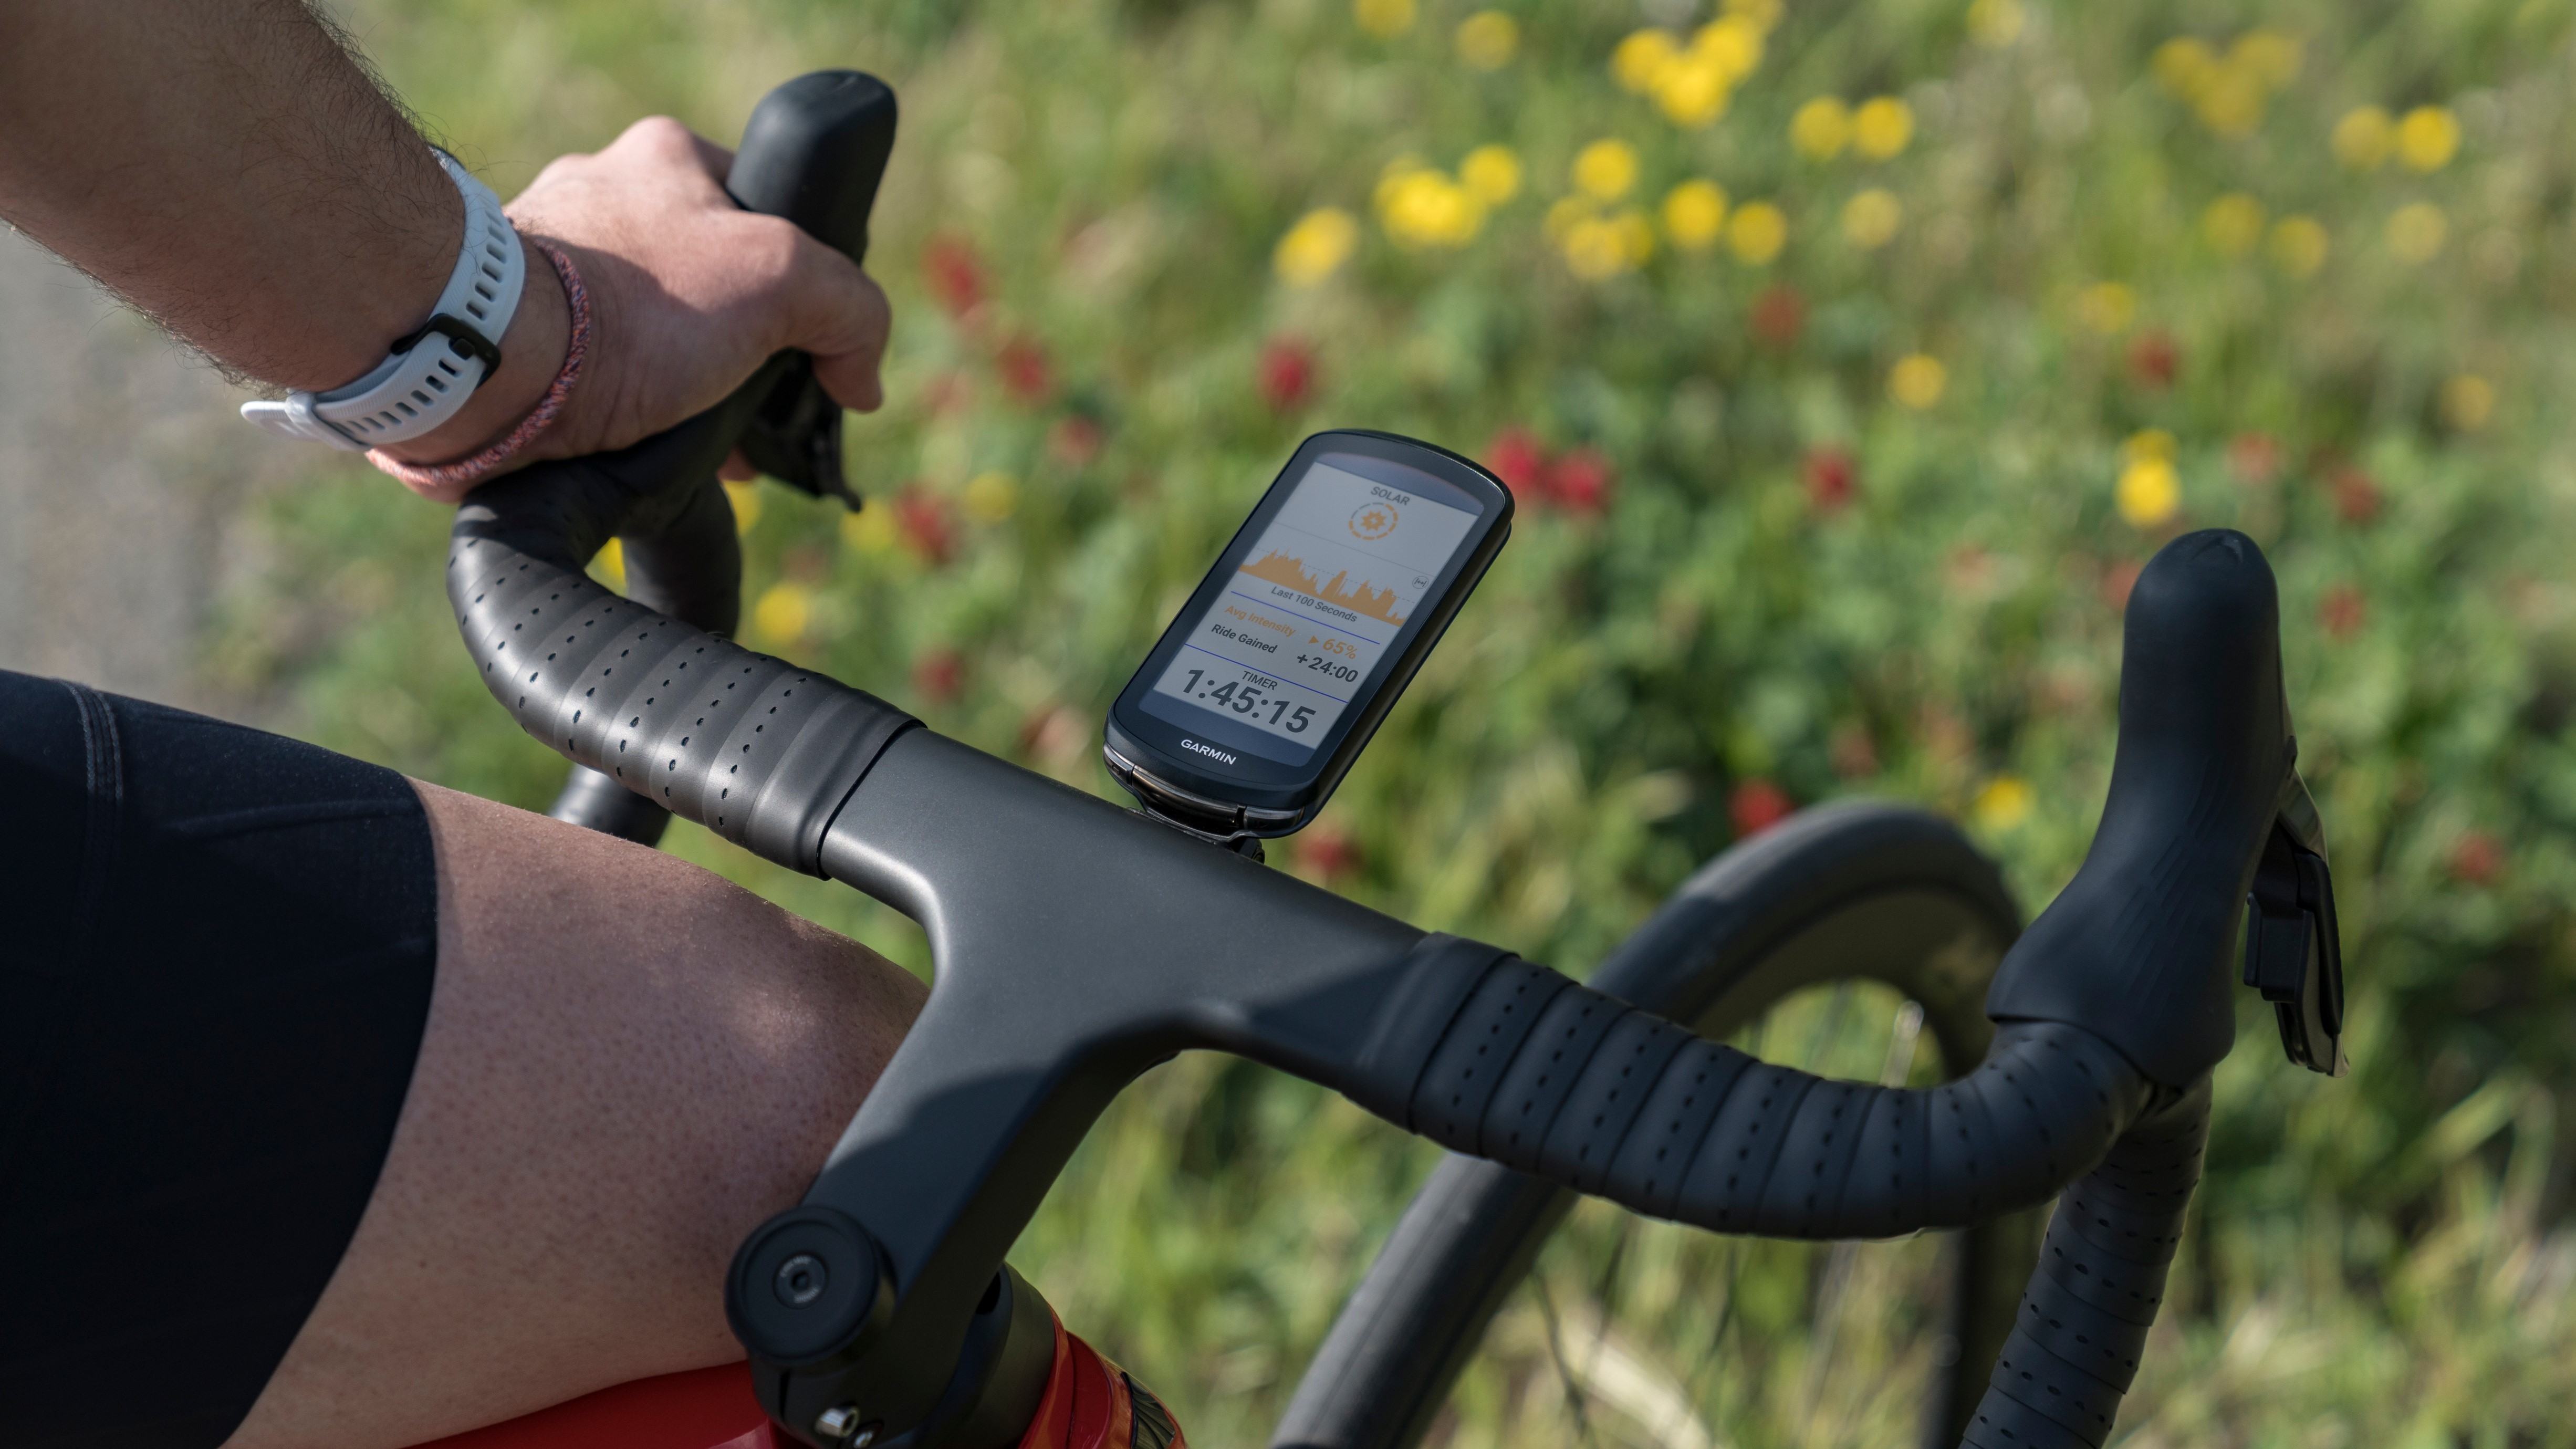 Garmin's new Edge Explore 2 will help cyclists find their way